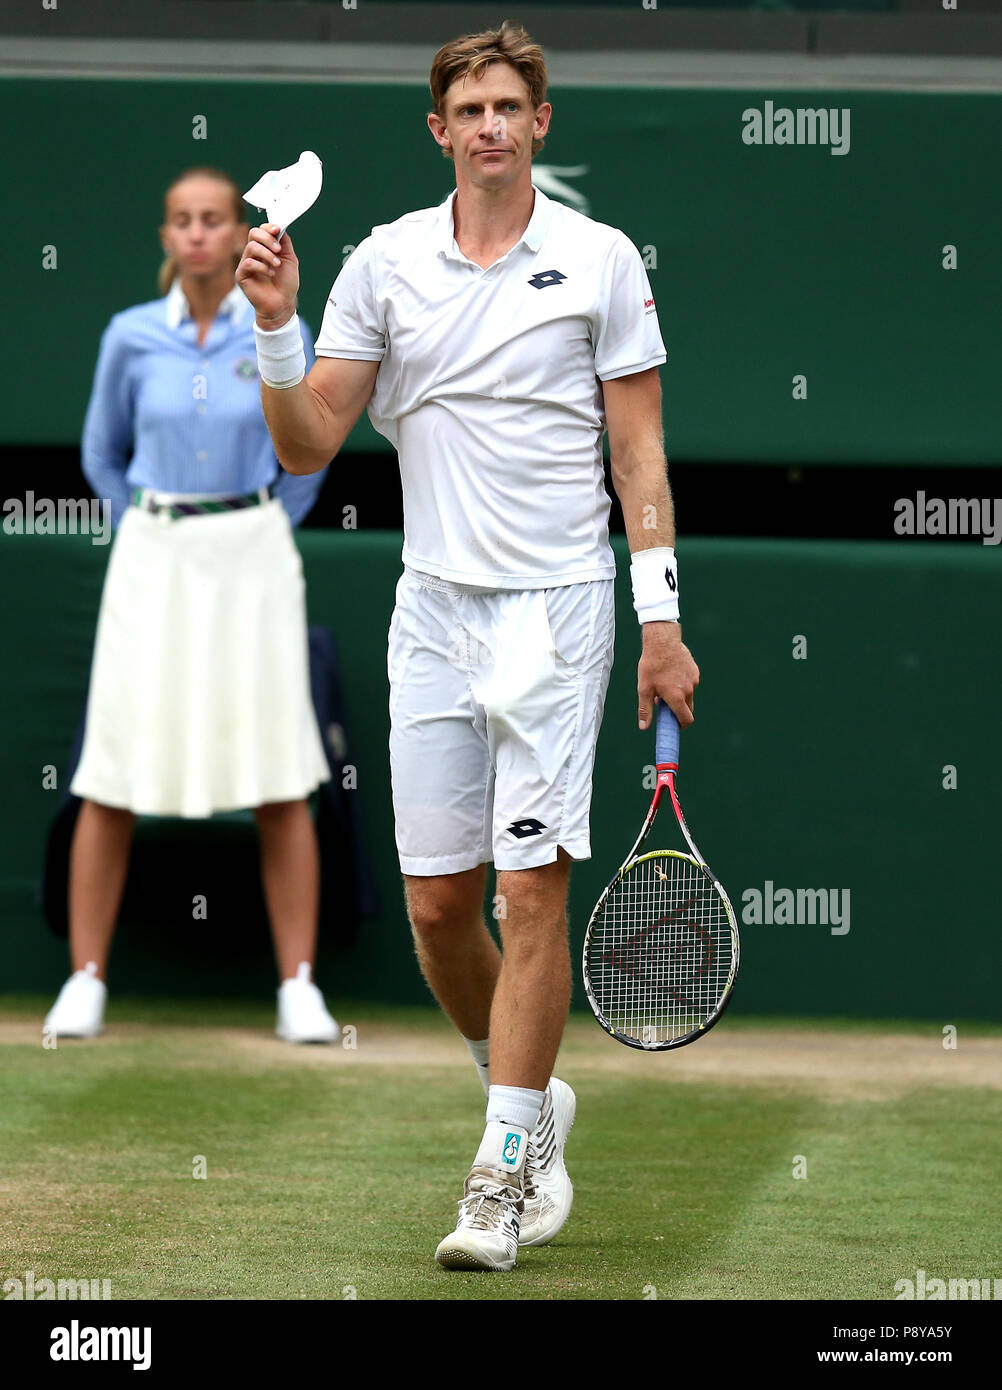 South African eighth seed Kevin Anderson celebrates having reached his first Wimbledon final, beating American ninth seed John Isner 7-6 (8/6) 6-7 (5/7) 6-7 (9/11) 6-4 26-24 in the longest semi-final in the tournamentâ€™s history on day eleven of the Wimbledon Championships at the All England Lawn Tennis and Croquet Club, Wimbledon. PRESS ASSOCIATION Photo. Picture date: Friday July 13, 2018. See PA story TENNIS Wimbledon. Photo credit should read: Steven Paston/PA Wire. RESTRICTIONS: Editorial use only. No commercial use without prior written consent of the AELTC. Still image use only - no mo Stock Photo